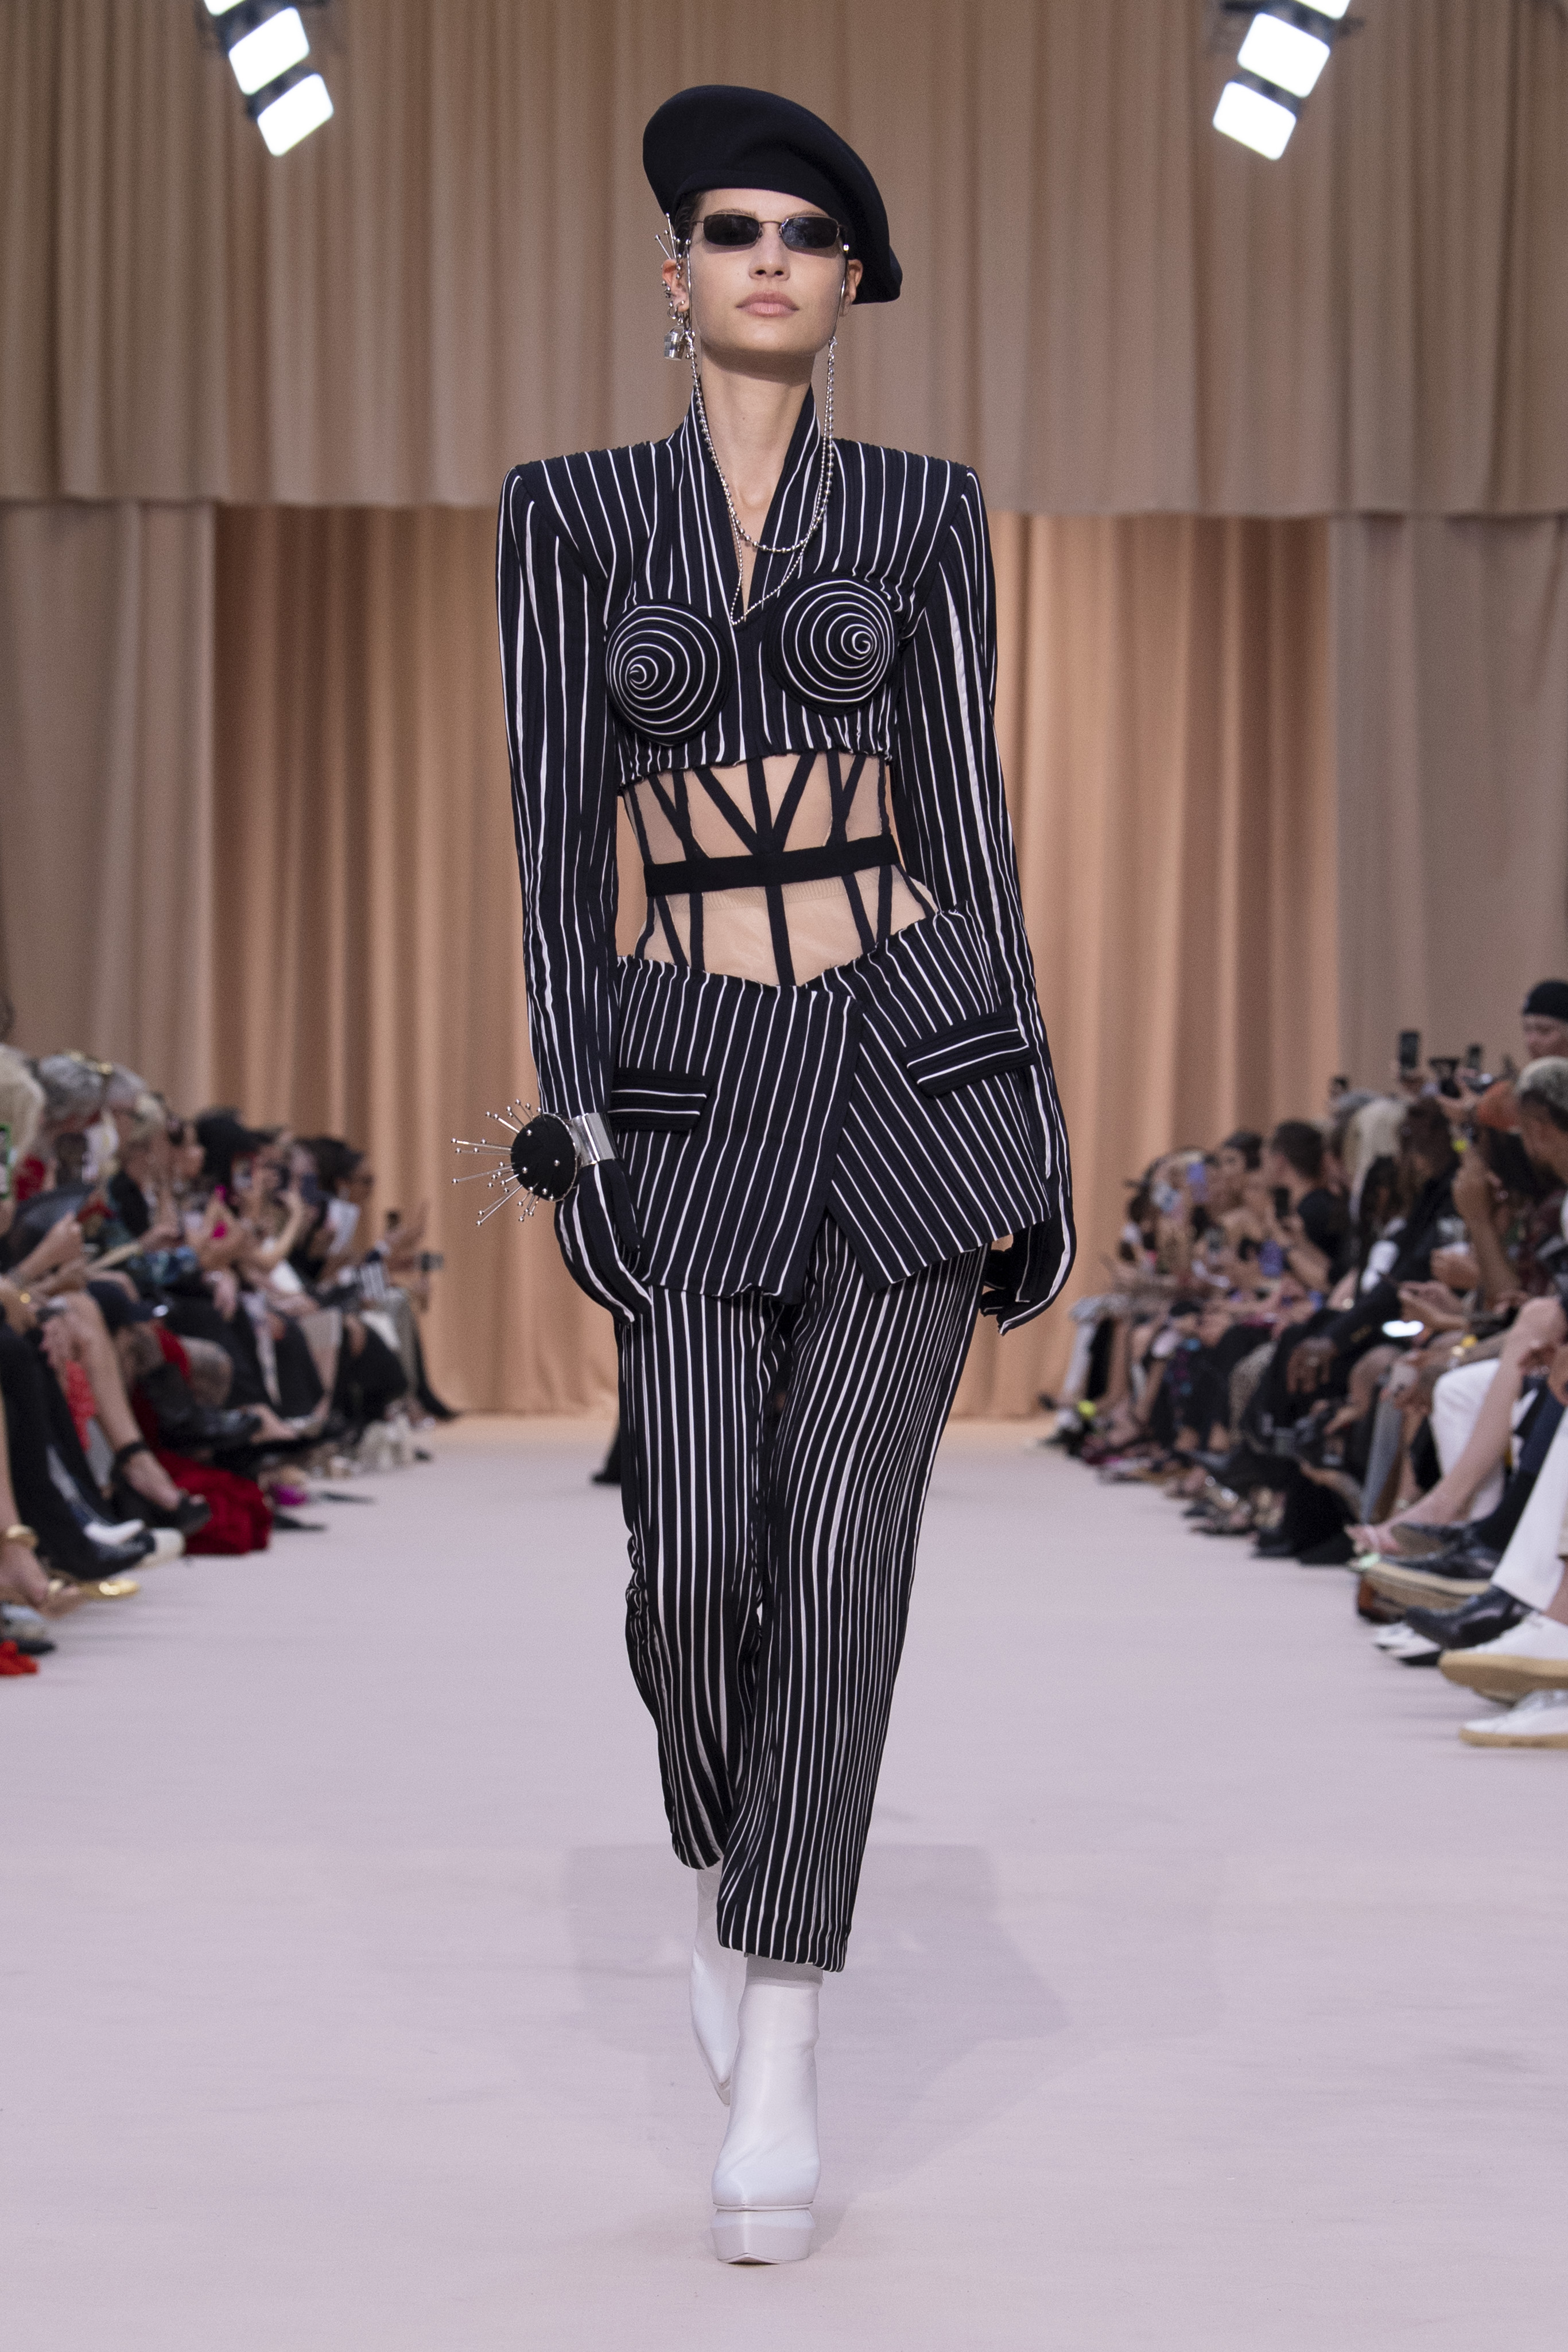 Olivier Rousteing's Jean Paul Gaultier Haute Couture Collection